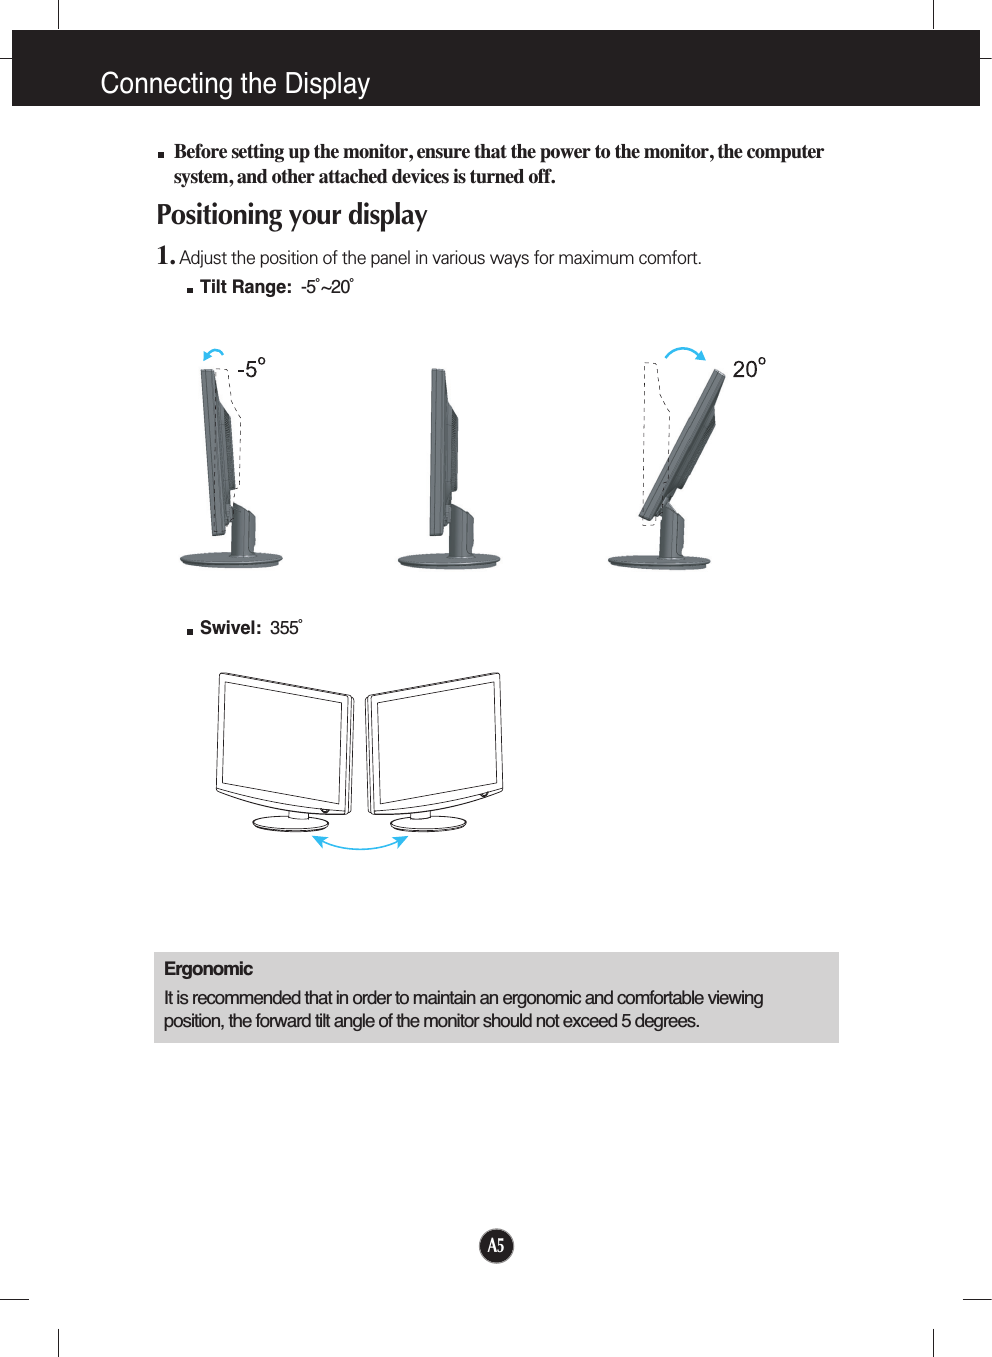 A5Connecting the DisplayBefore setting up the monitor, ensure that the power to the monitor, the computersystem, and other attached devices is turned off. Positioning your display1. Adjust the position of the panel in various ways for maximum comfort.Tilt Range: -5˚~20˚ ErgonomicIt is recommended that in order to maintain an ergonomic and comfortable viewingposition, the forward tilt angle of the monitor should not exceed 5 degrees.Swivel: 355˚ 